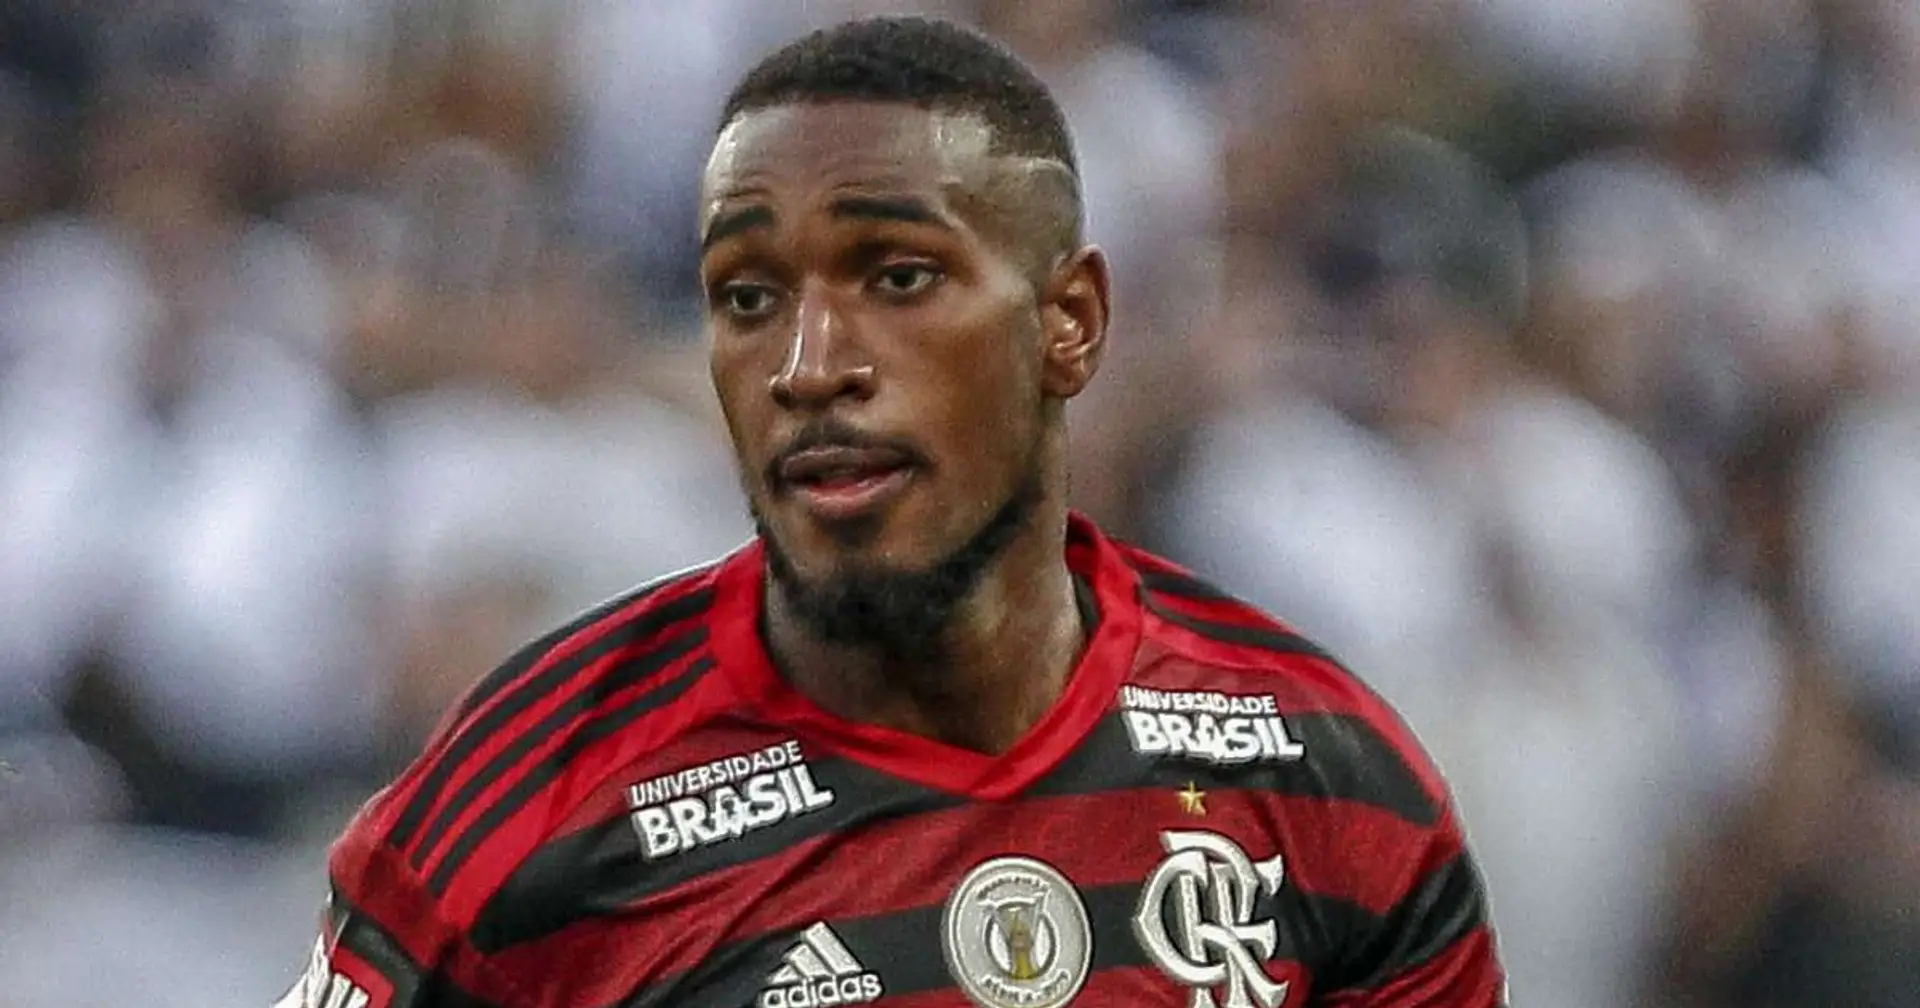 Father of Flamengo central midfielder Gerson claims Arsenal interested in his son